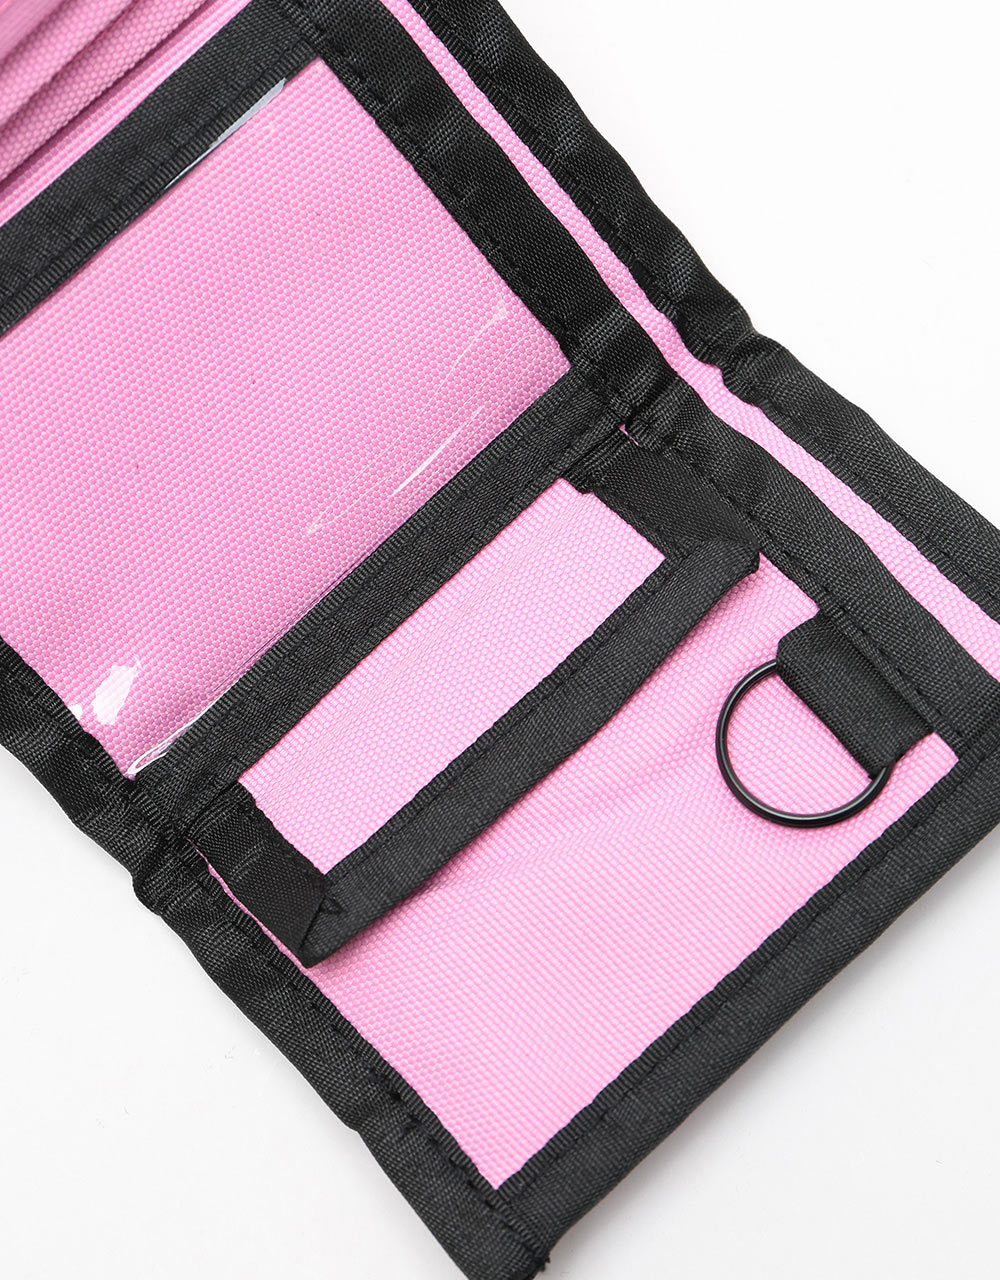 Route One Athletic Tri-Fold Wallet - Light Pink